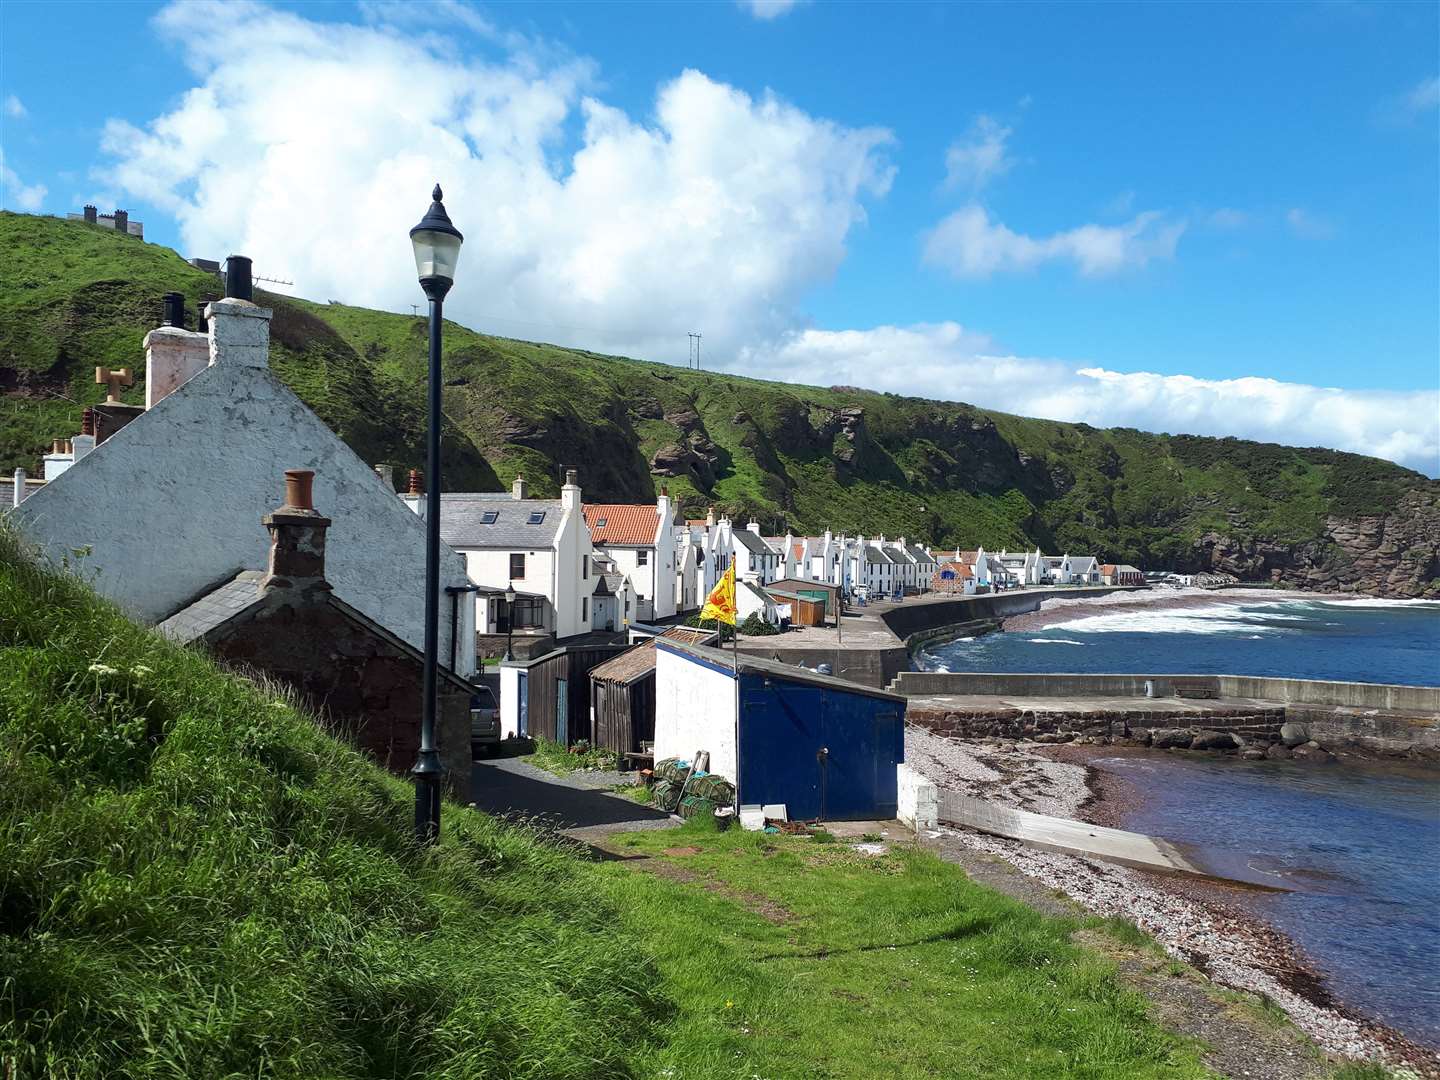 Views are being sought on the conservation status of Pennan